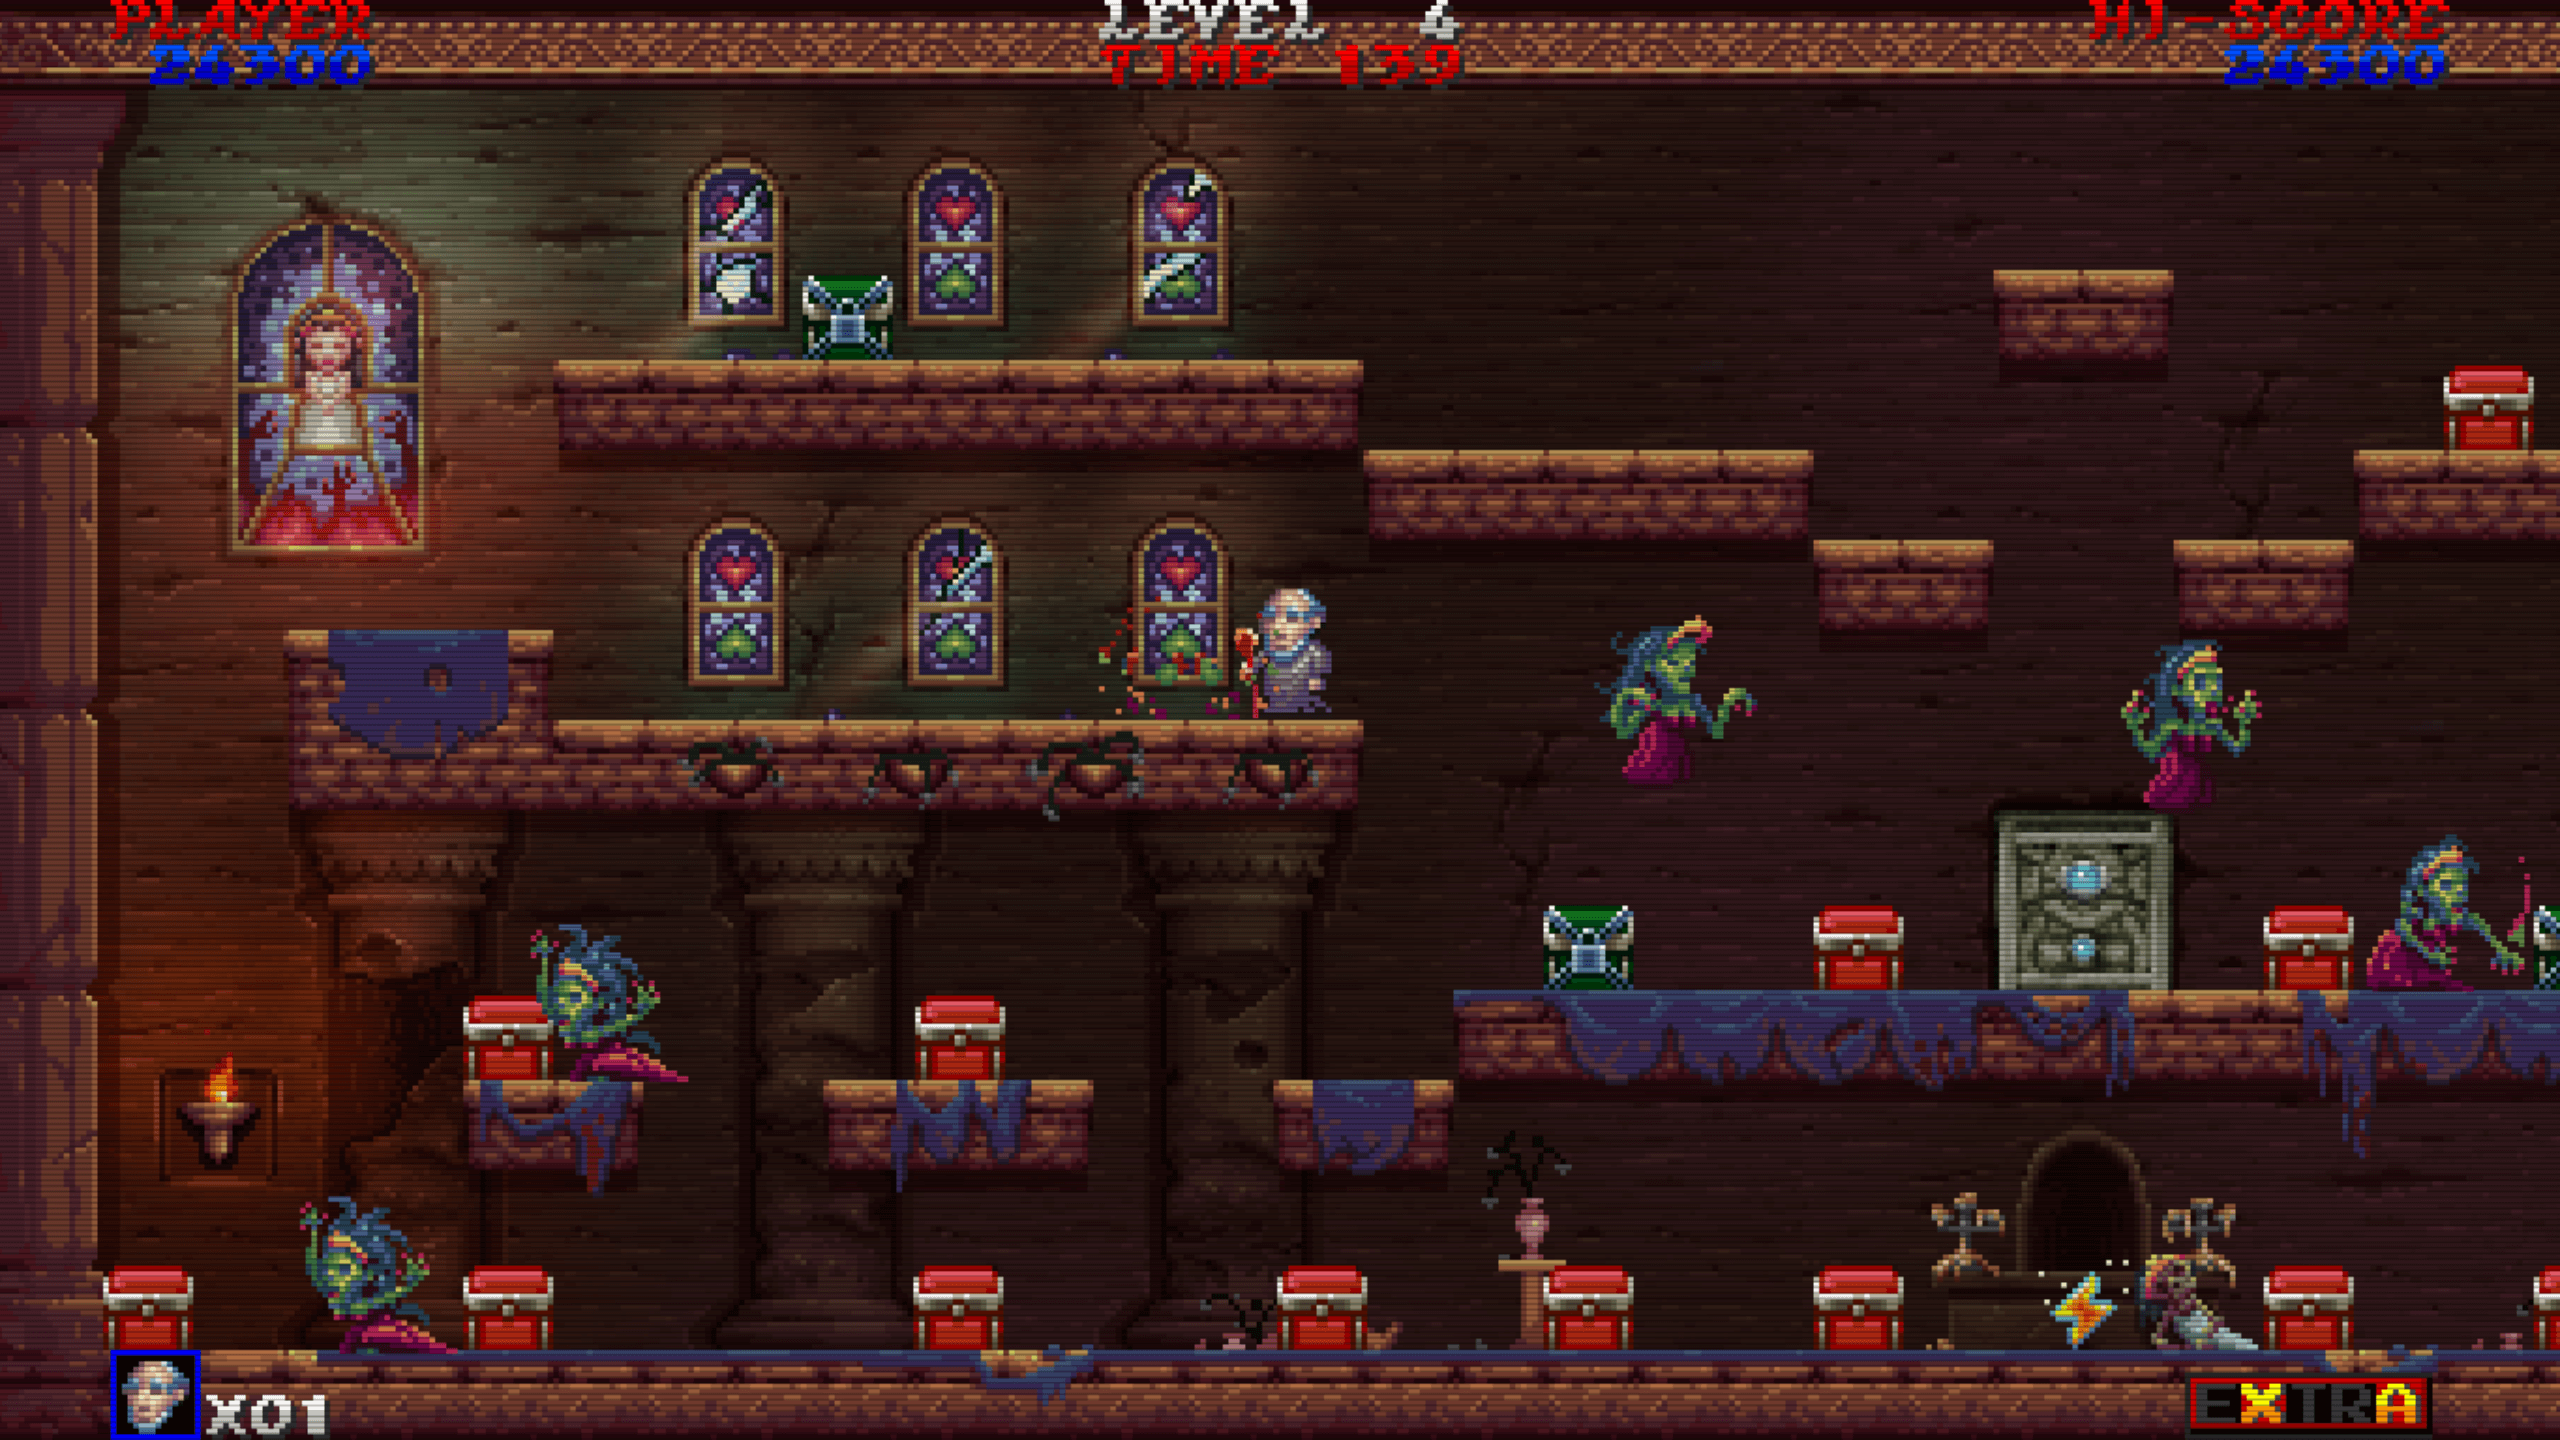 This stage is full of angry zombie ladies.